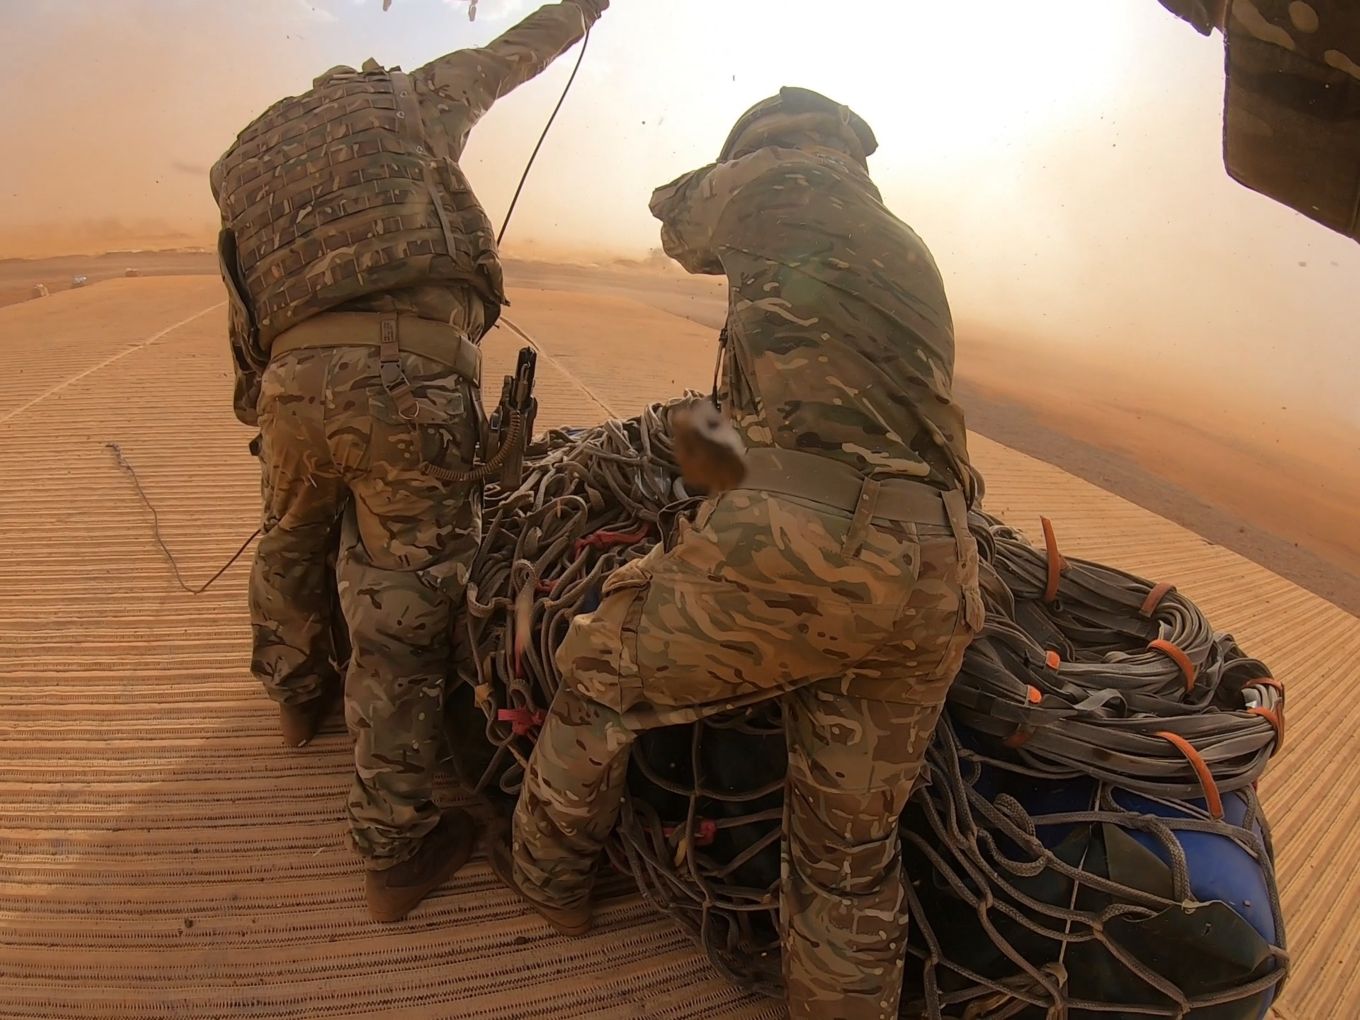 Personnel attach hooks to Chinook, as it hovers ahead and stirs up sand.